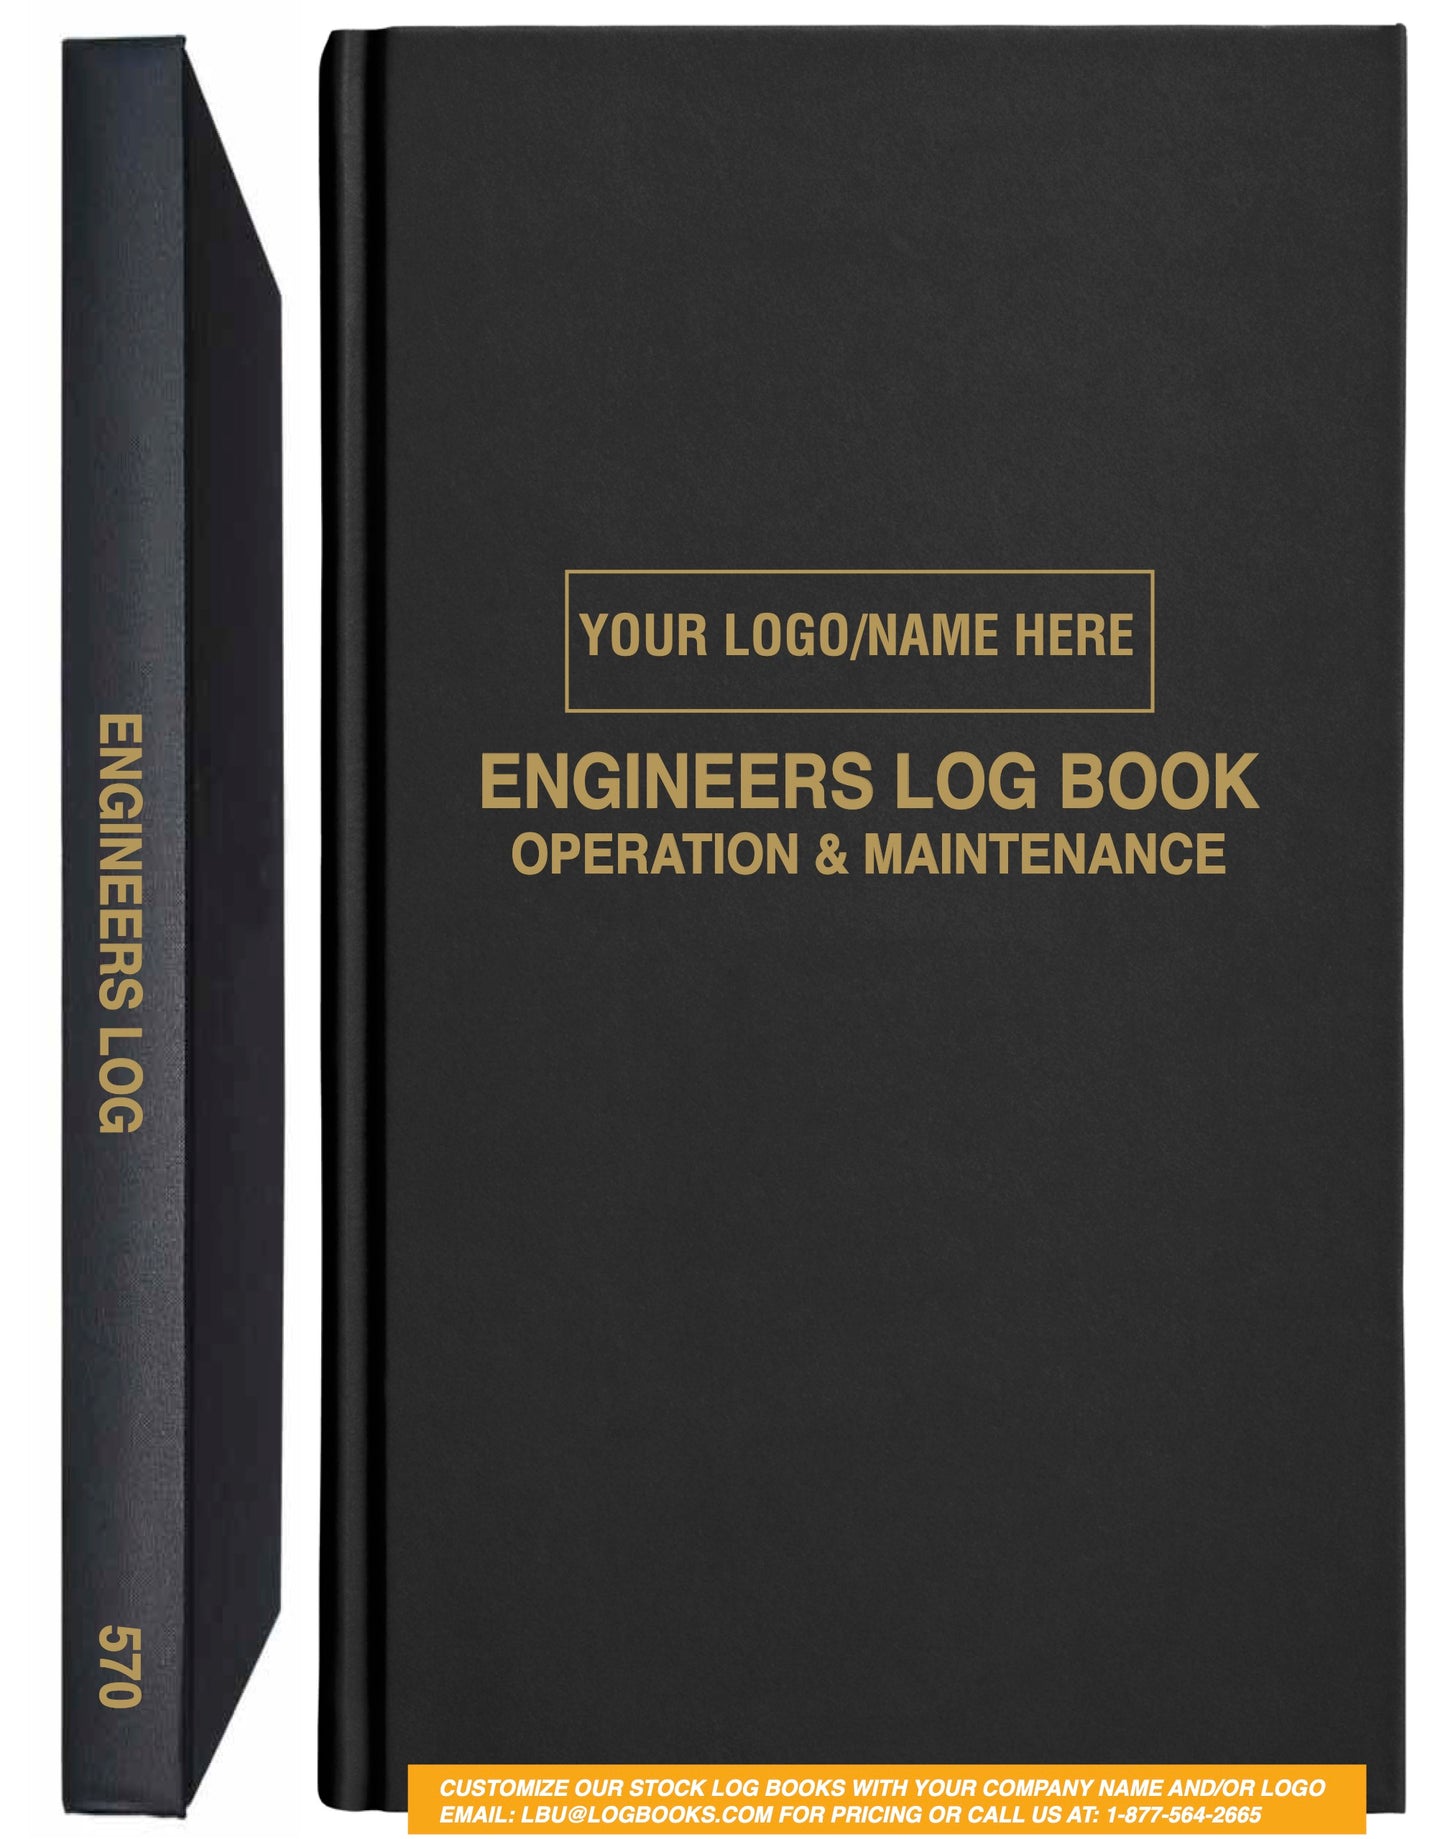 Engineers (3 Shifts per page) Log Book #570